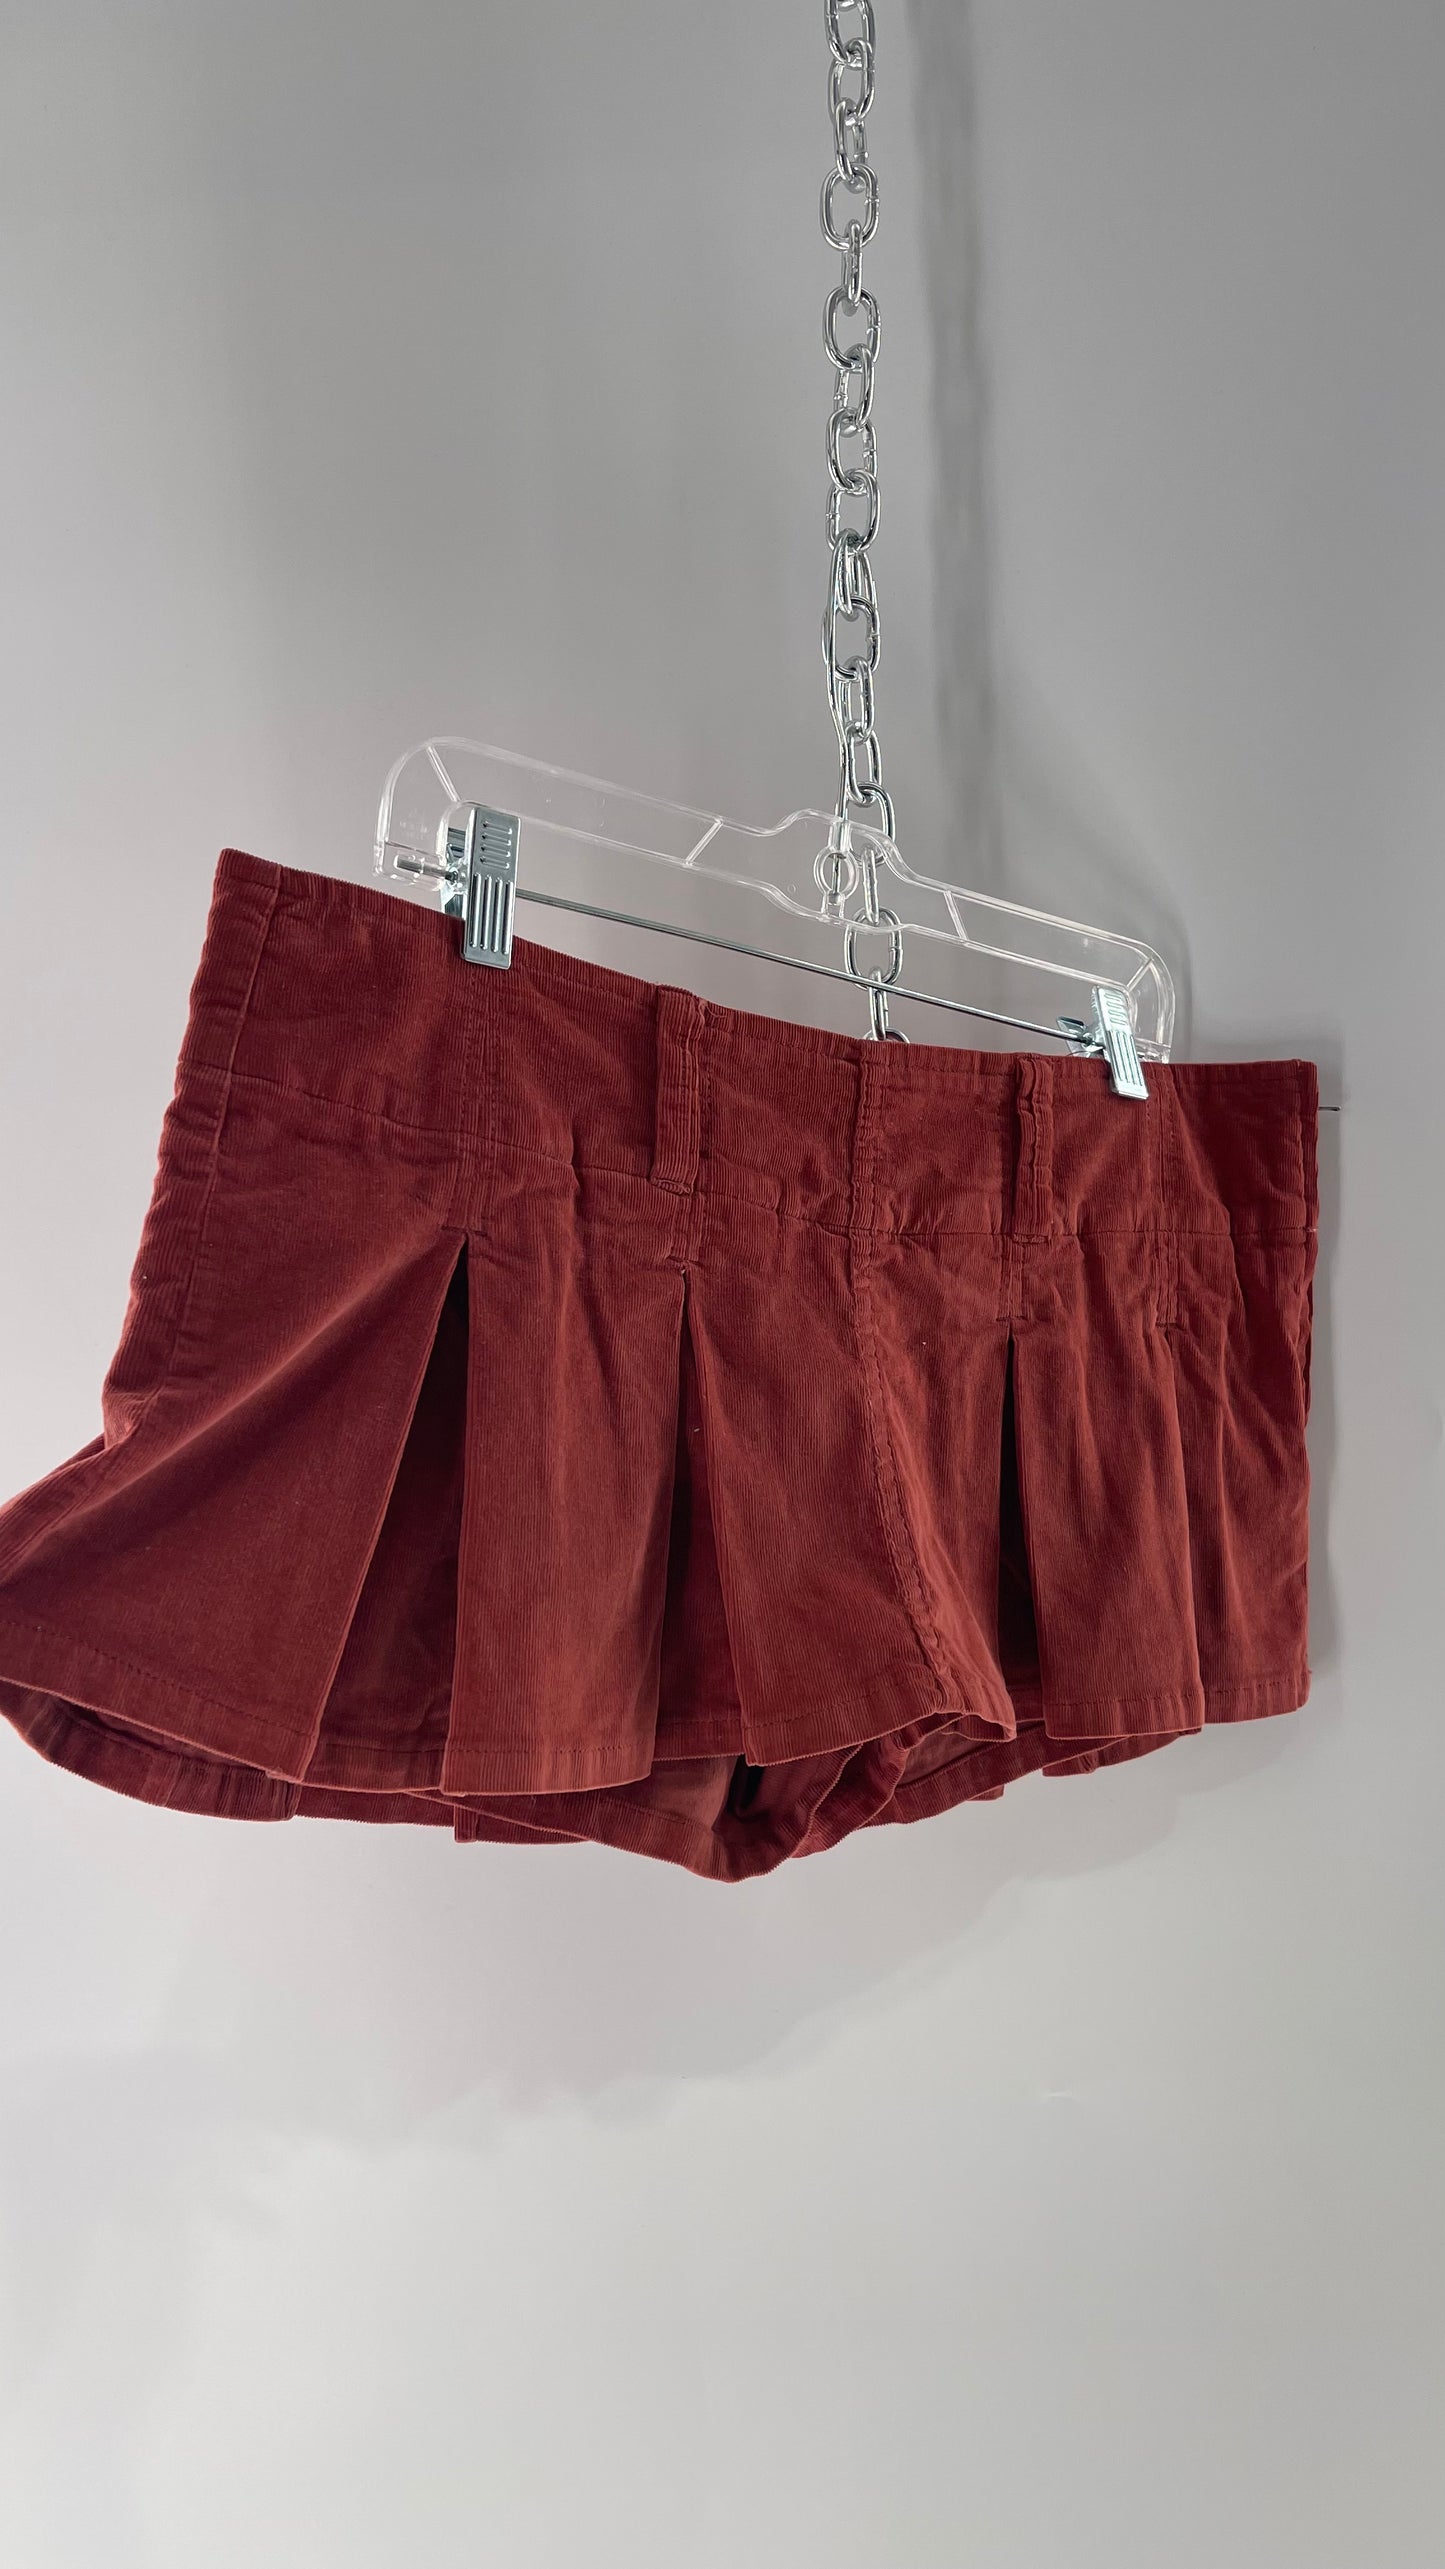 Free People Corduroy Terracotta Pleated Micro Mini Skirt with Tags Attached (6)